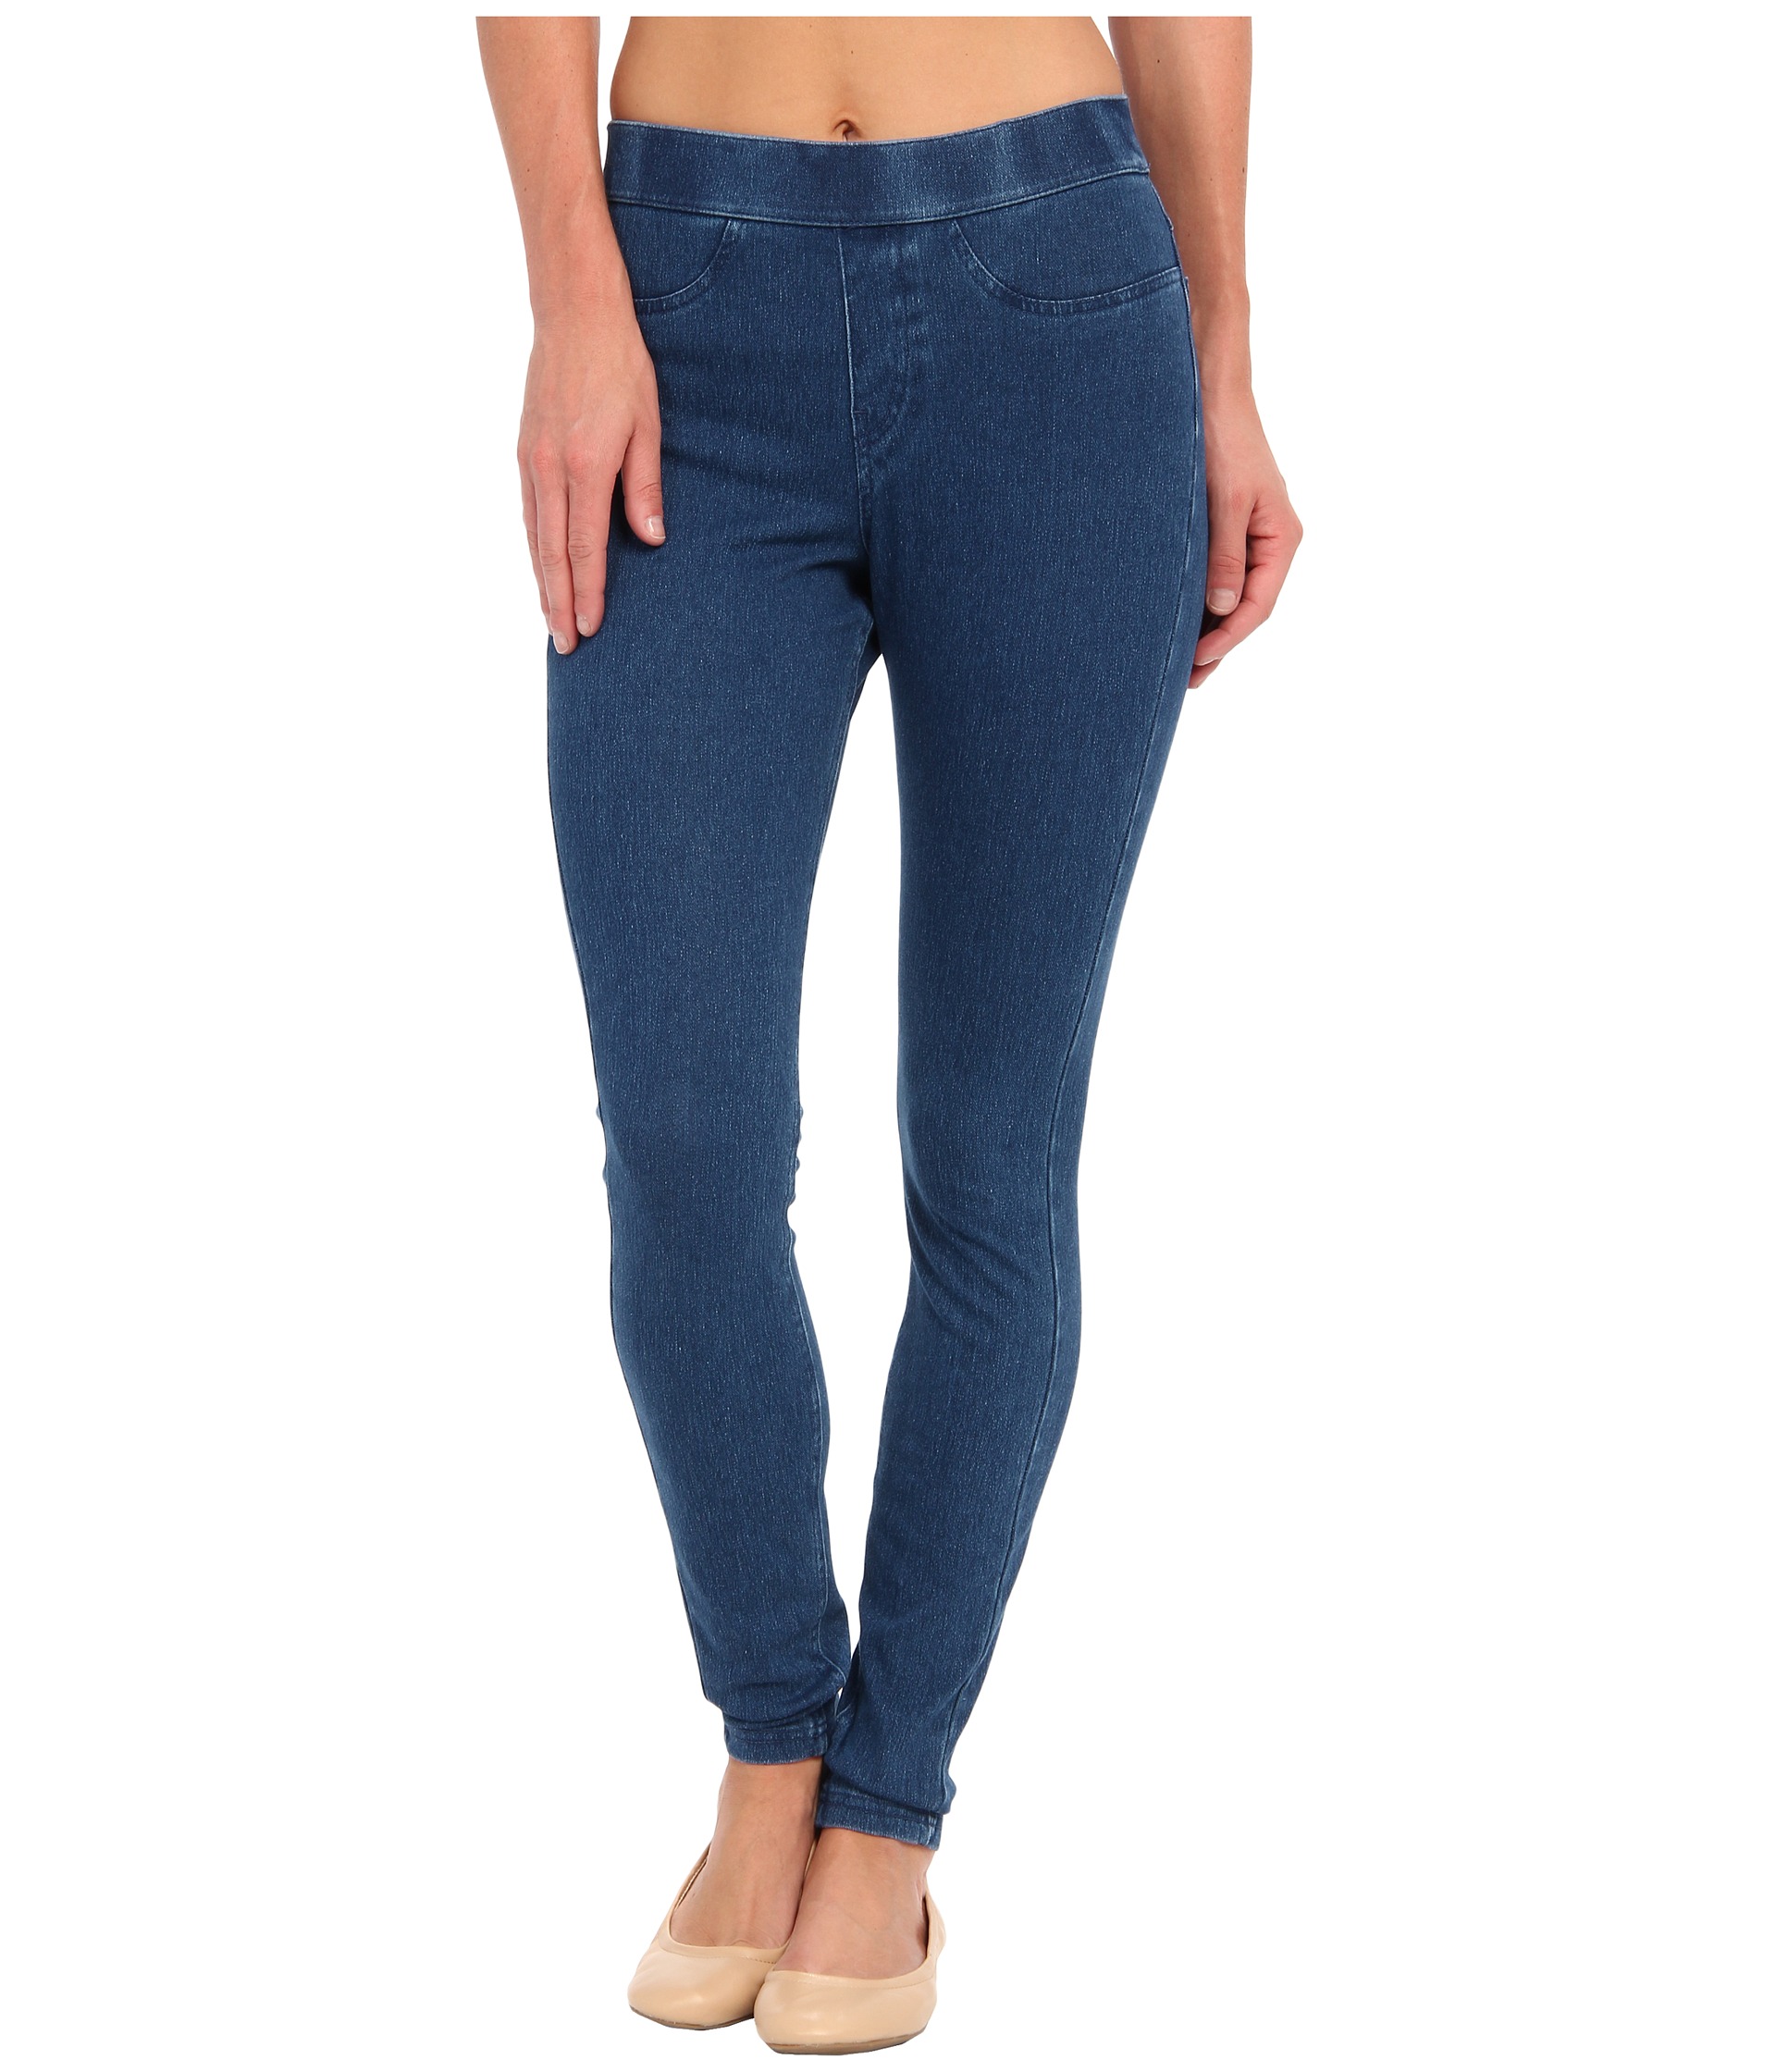 HUE Curvy Fit Jeans Leggings - Zappos.com Free Shipping BOTH Ways